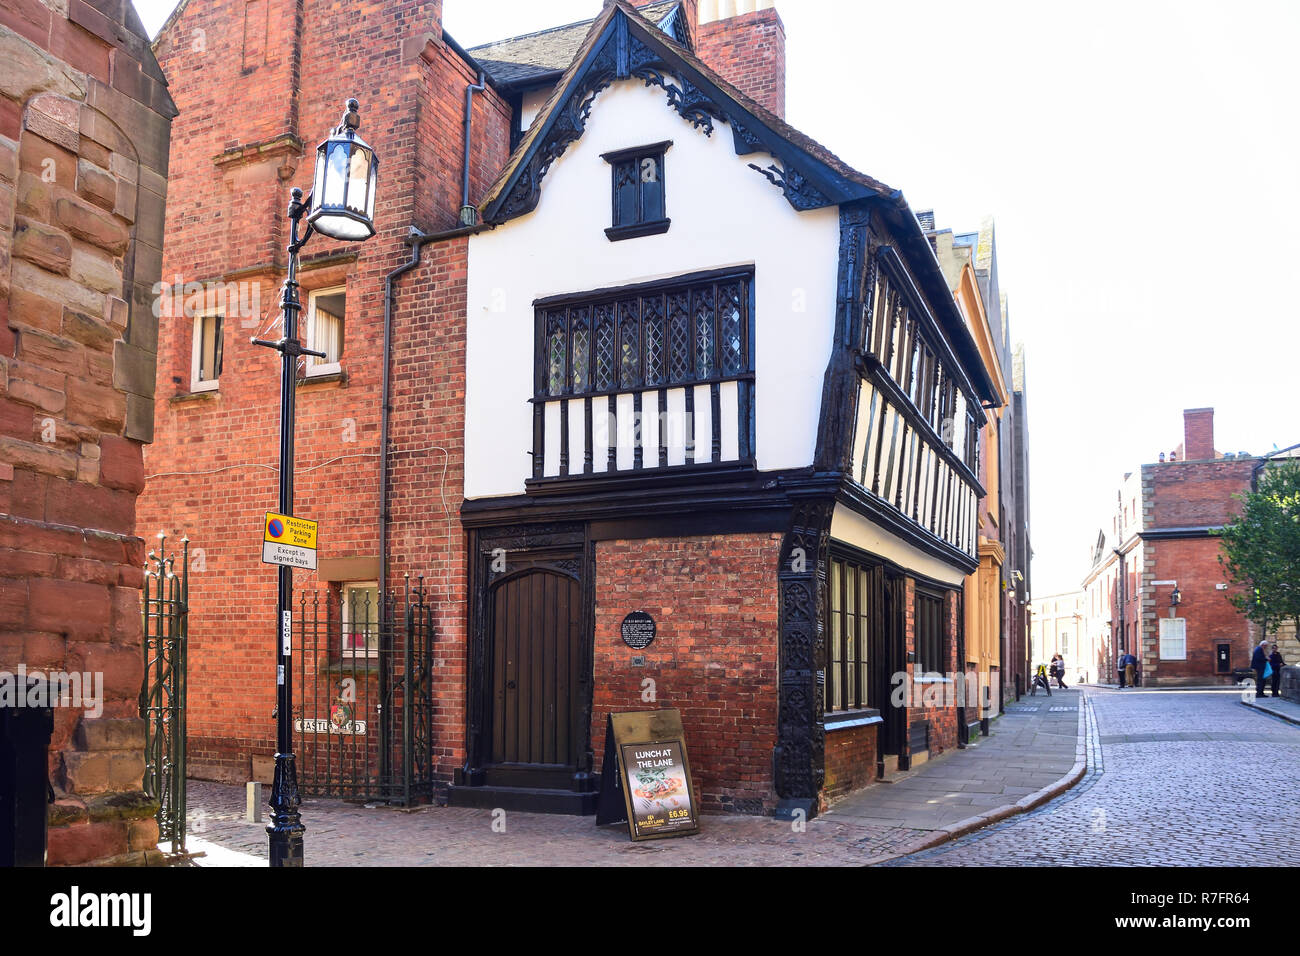 St Mary's Guildhall, Bayley Lane, Coventry, West Midlands, England, United Kingdom Stock Photo